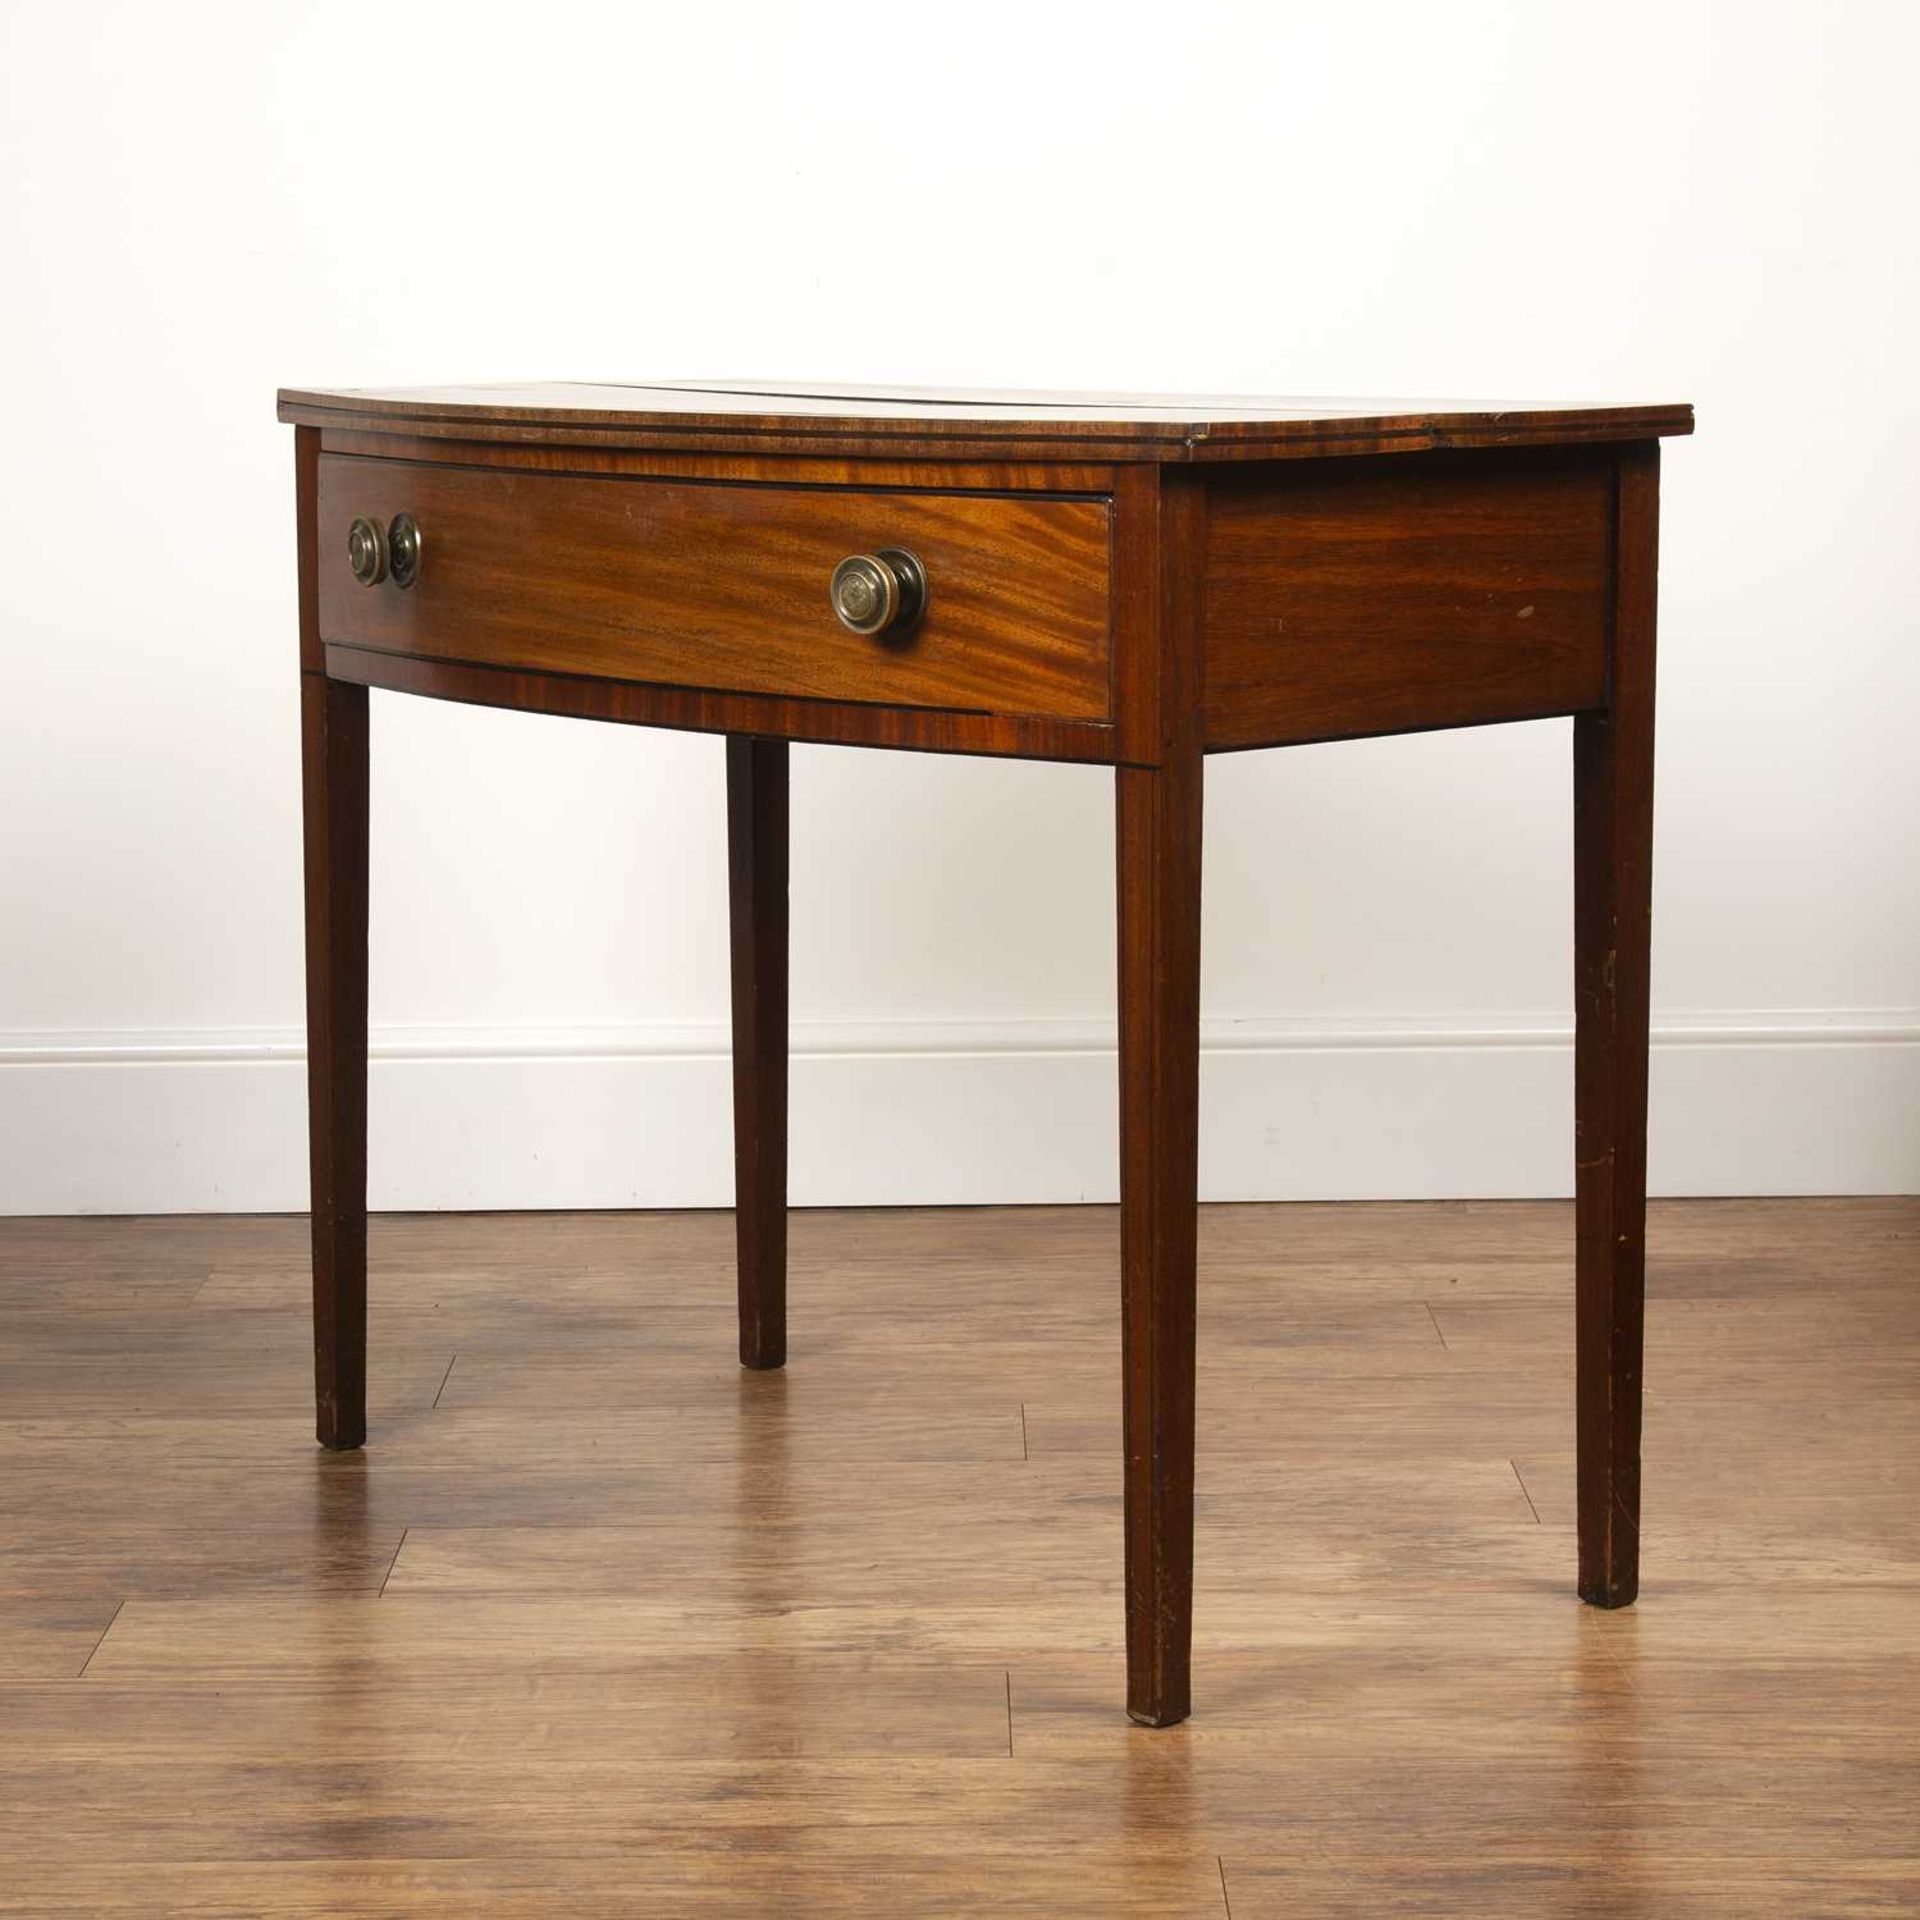 Mahogany bow fronted side table with single frieze drawer and brass handles, standing on square - Image 3 of 5